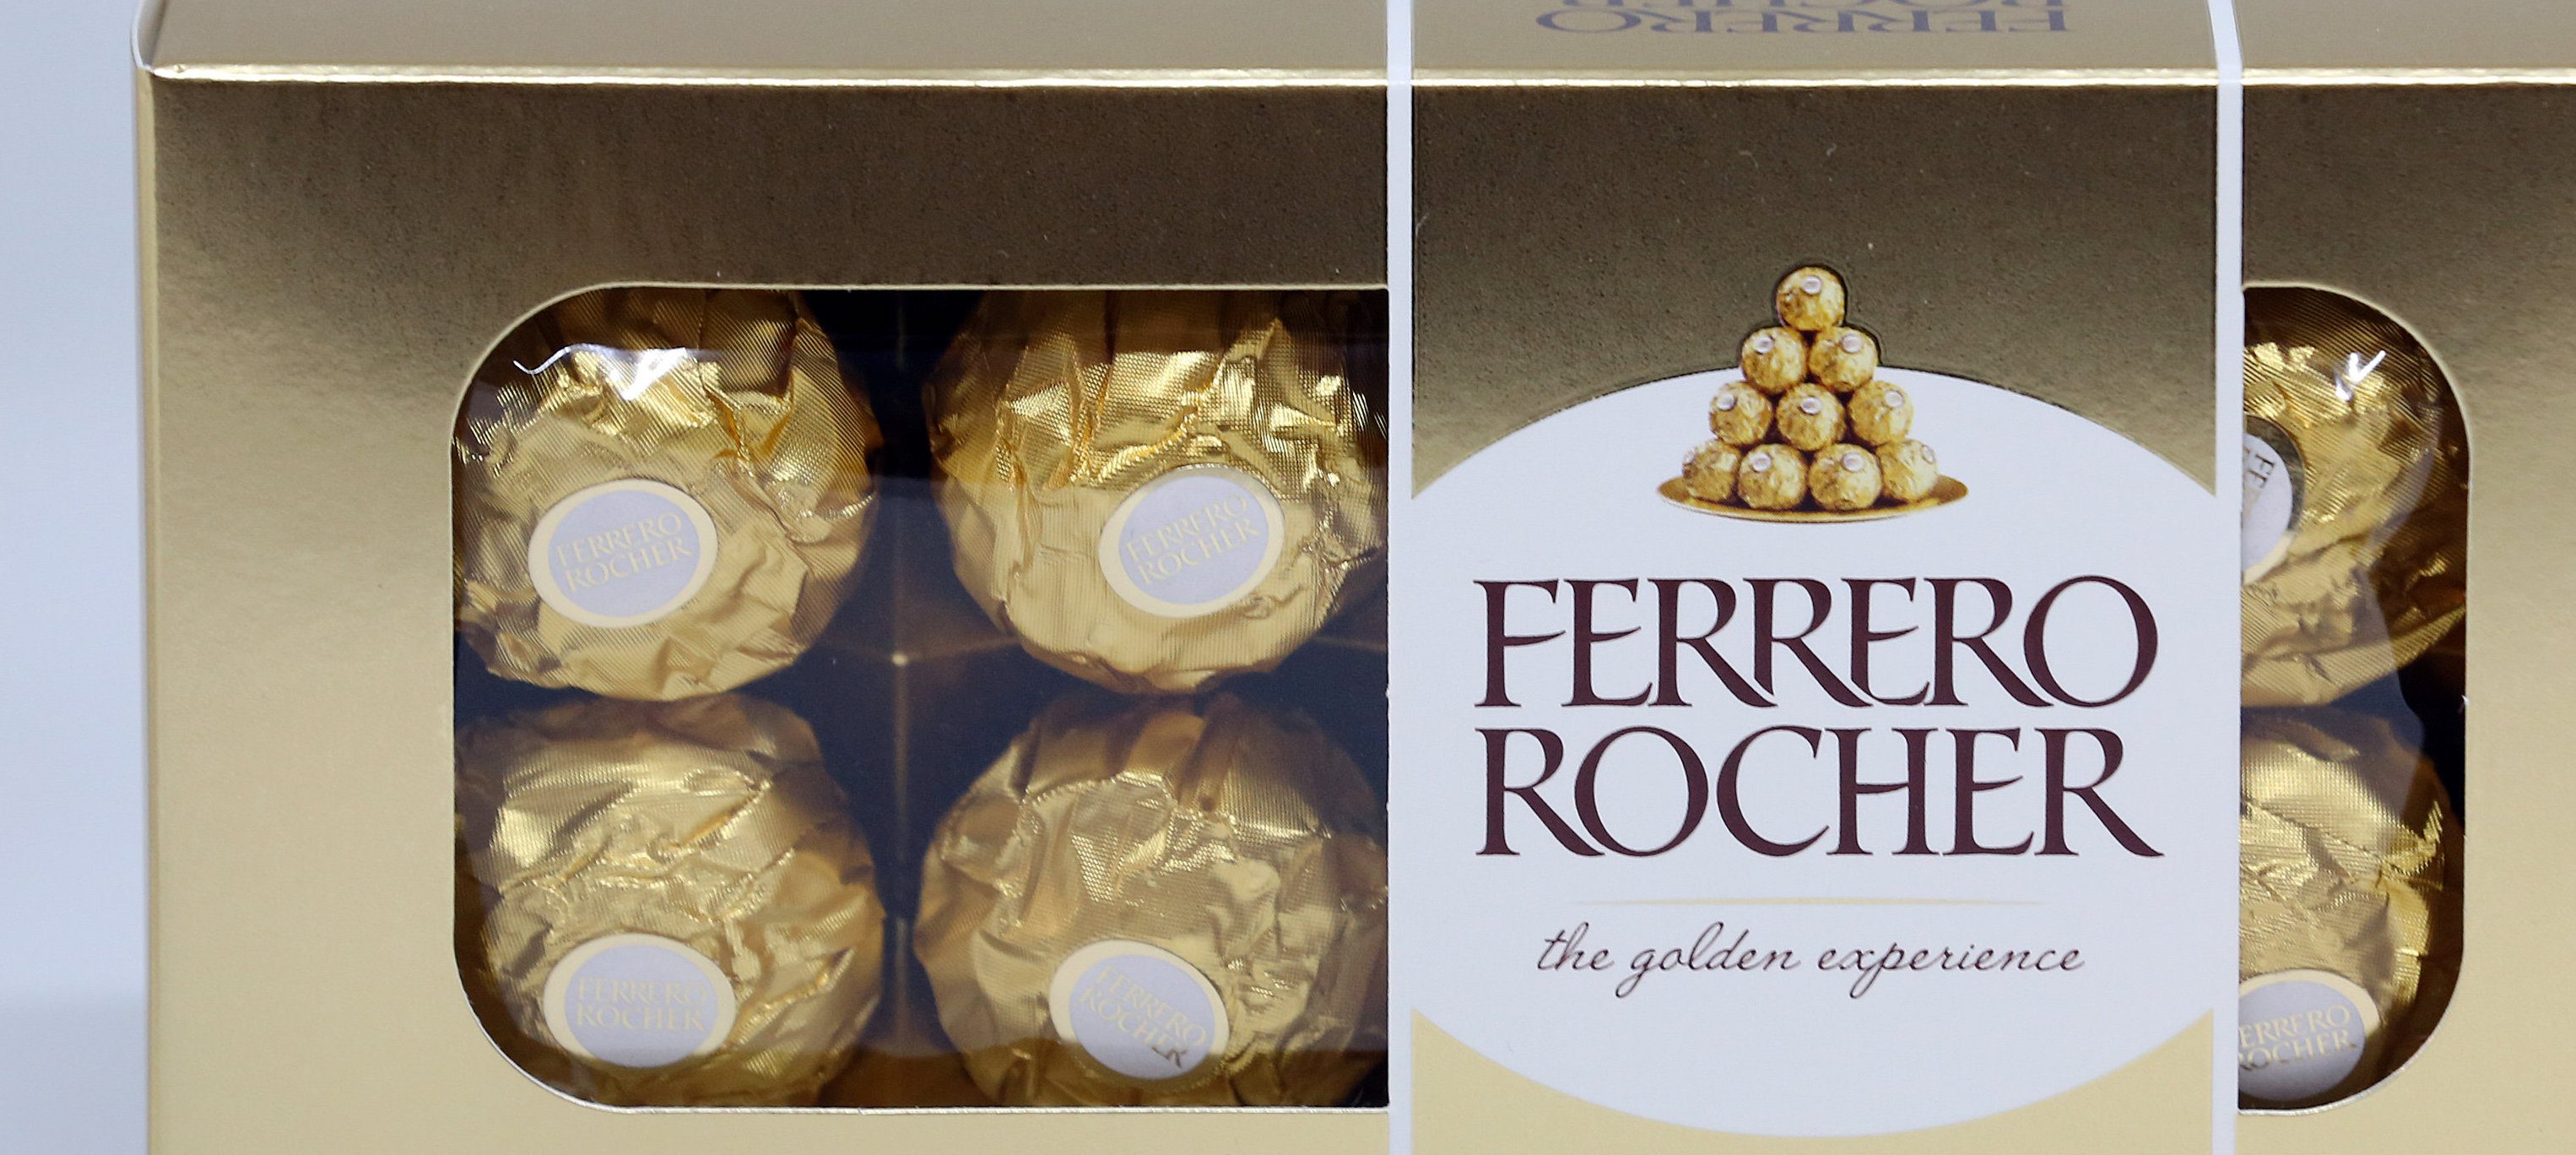 After 70 years of shunning acquisitions, Ferrero helmsman breaks tradition